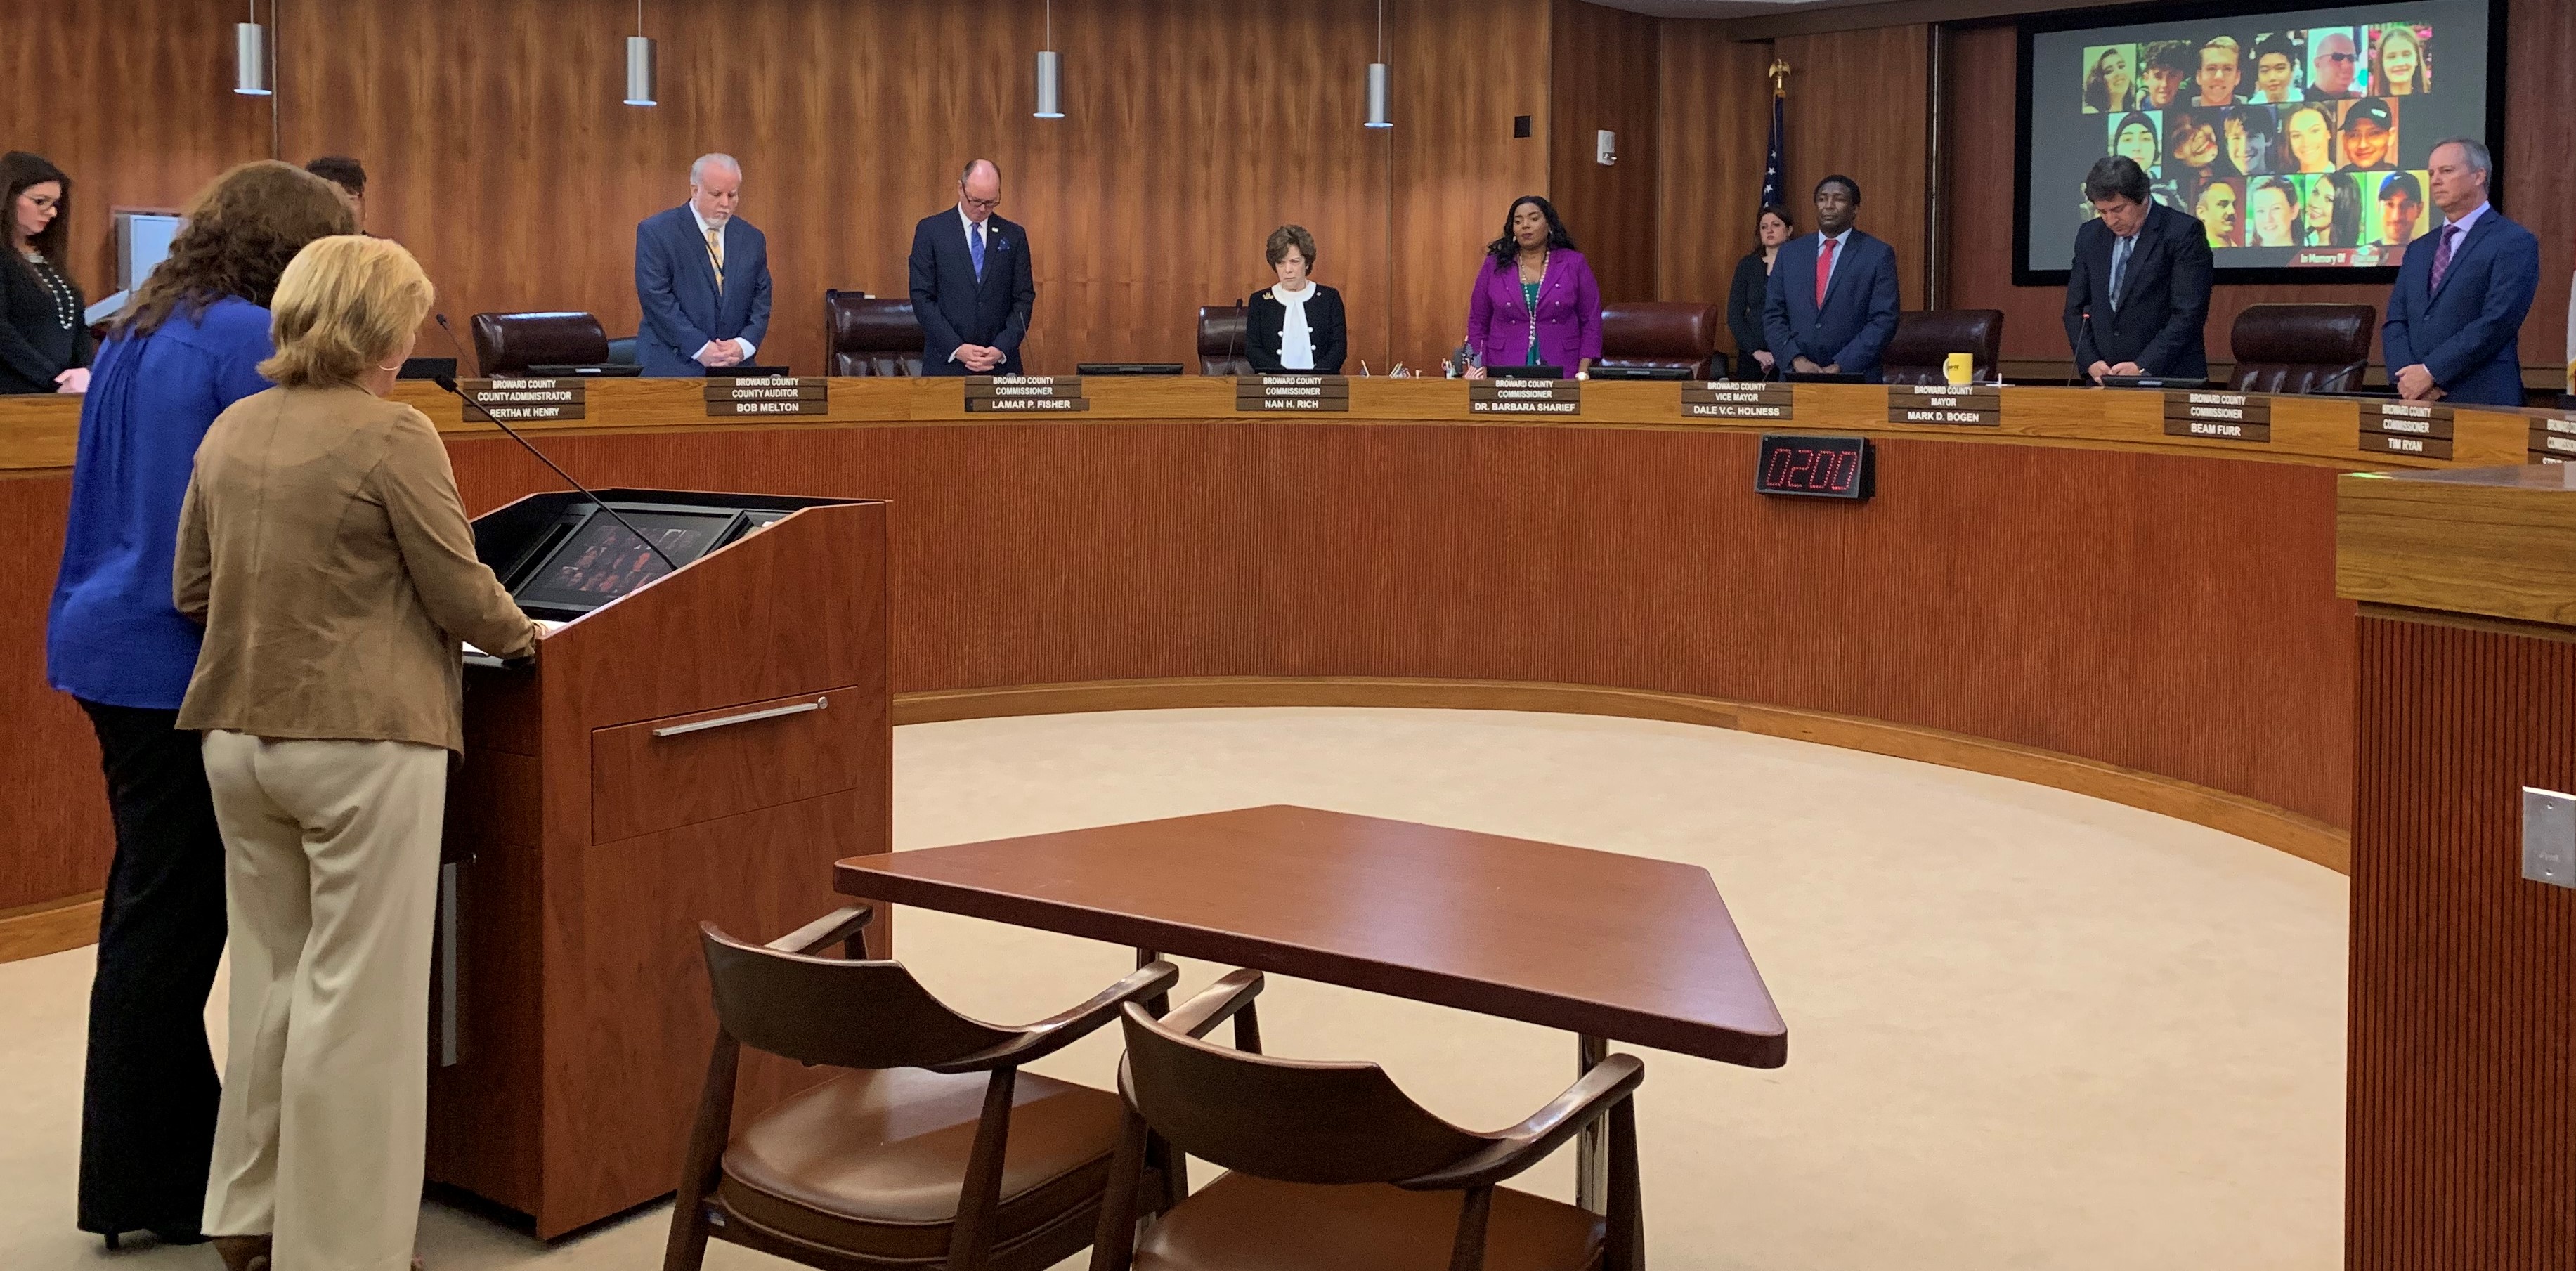 Broward Mayor Mark Bogen is joined by City Mayors from Parkland and Coral Springs and Broward Commissioners for 17 seconds of silence in memory of MSD shooting as one year anniversary nears on February 14.  